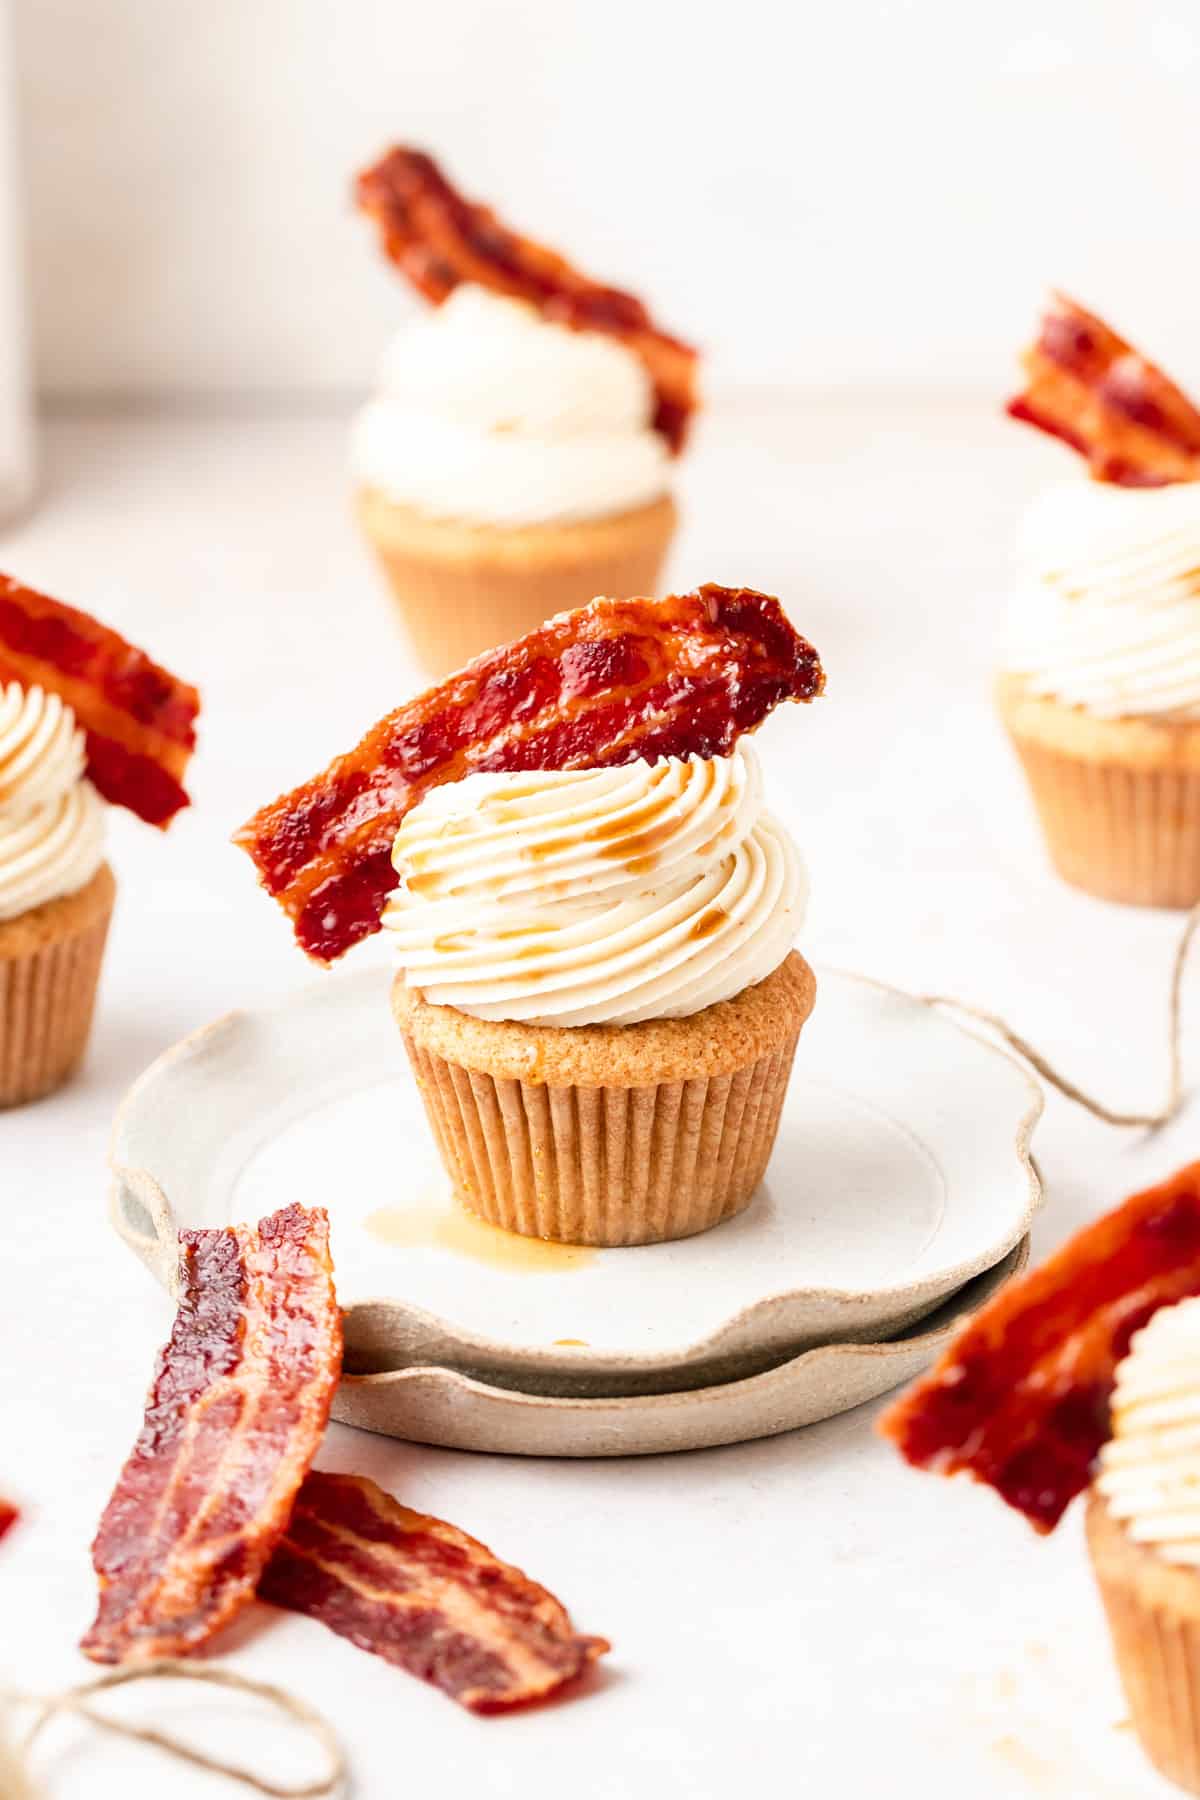 maple bourbon cupcakes topped with candied bacon.